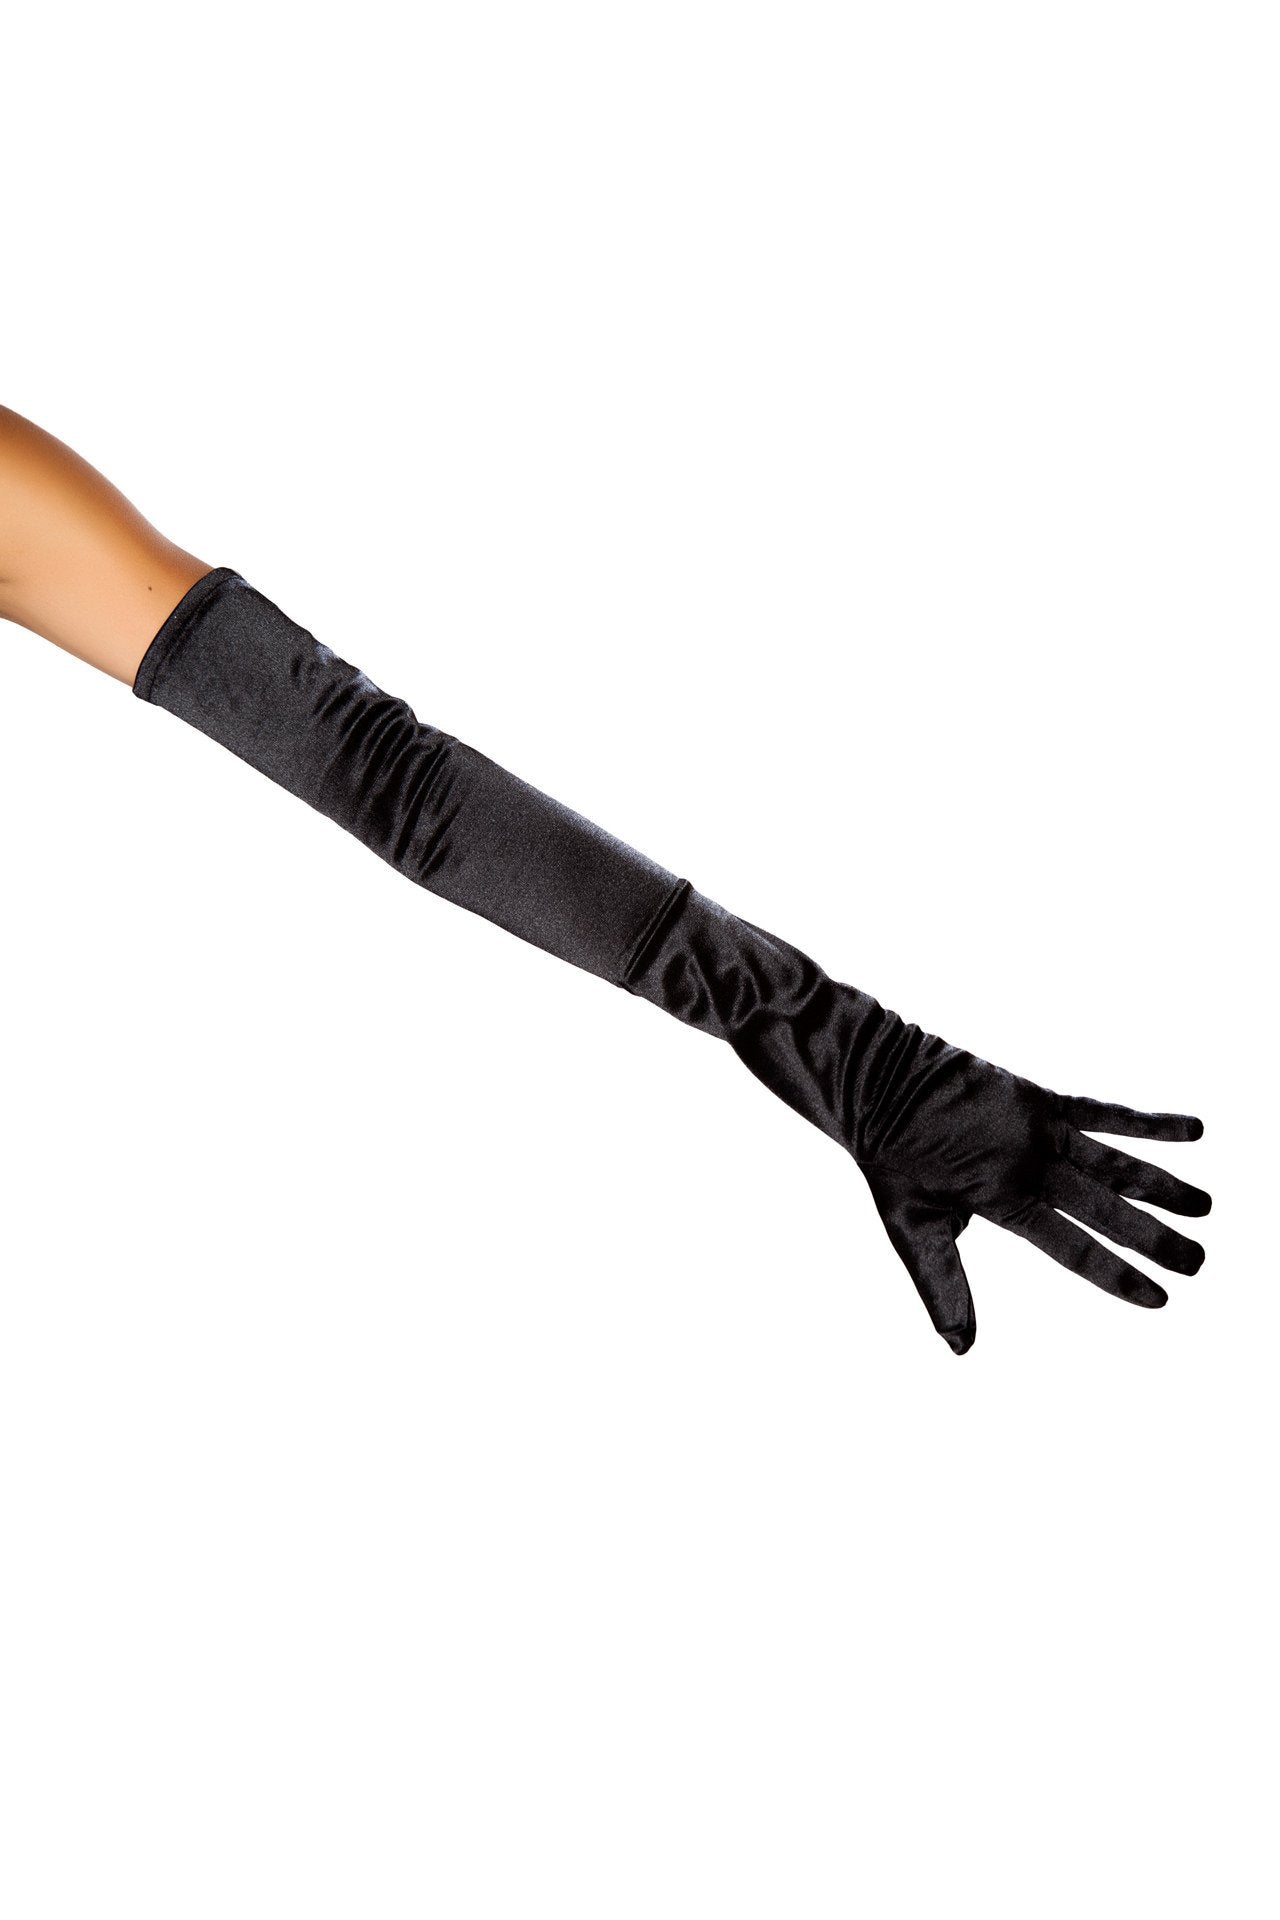 Roma Costume Accessories One Size / Black 10104 - Stretch Satin Gloves